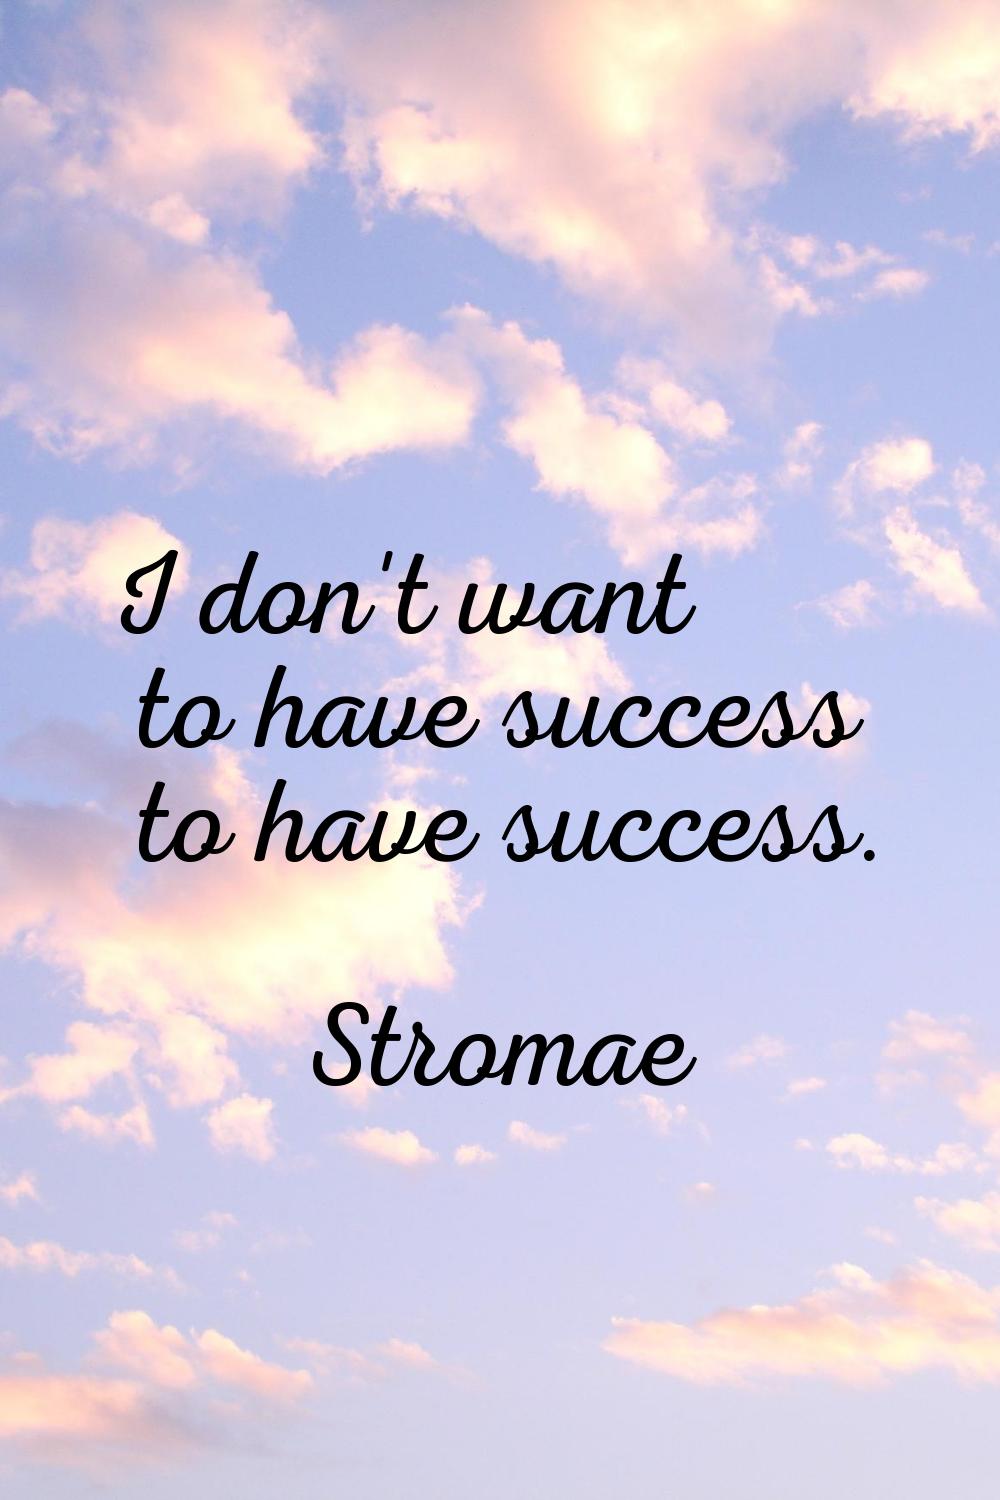 I don't want to have success to have success.